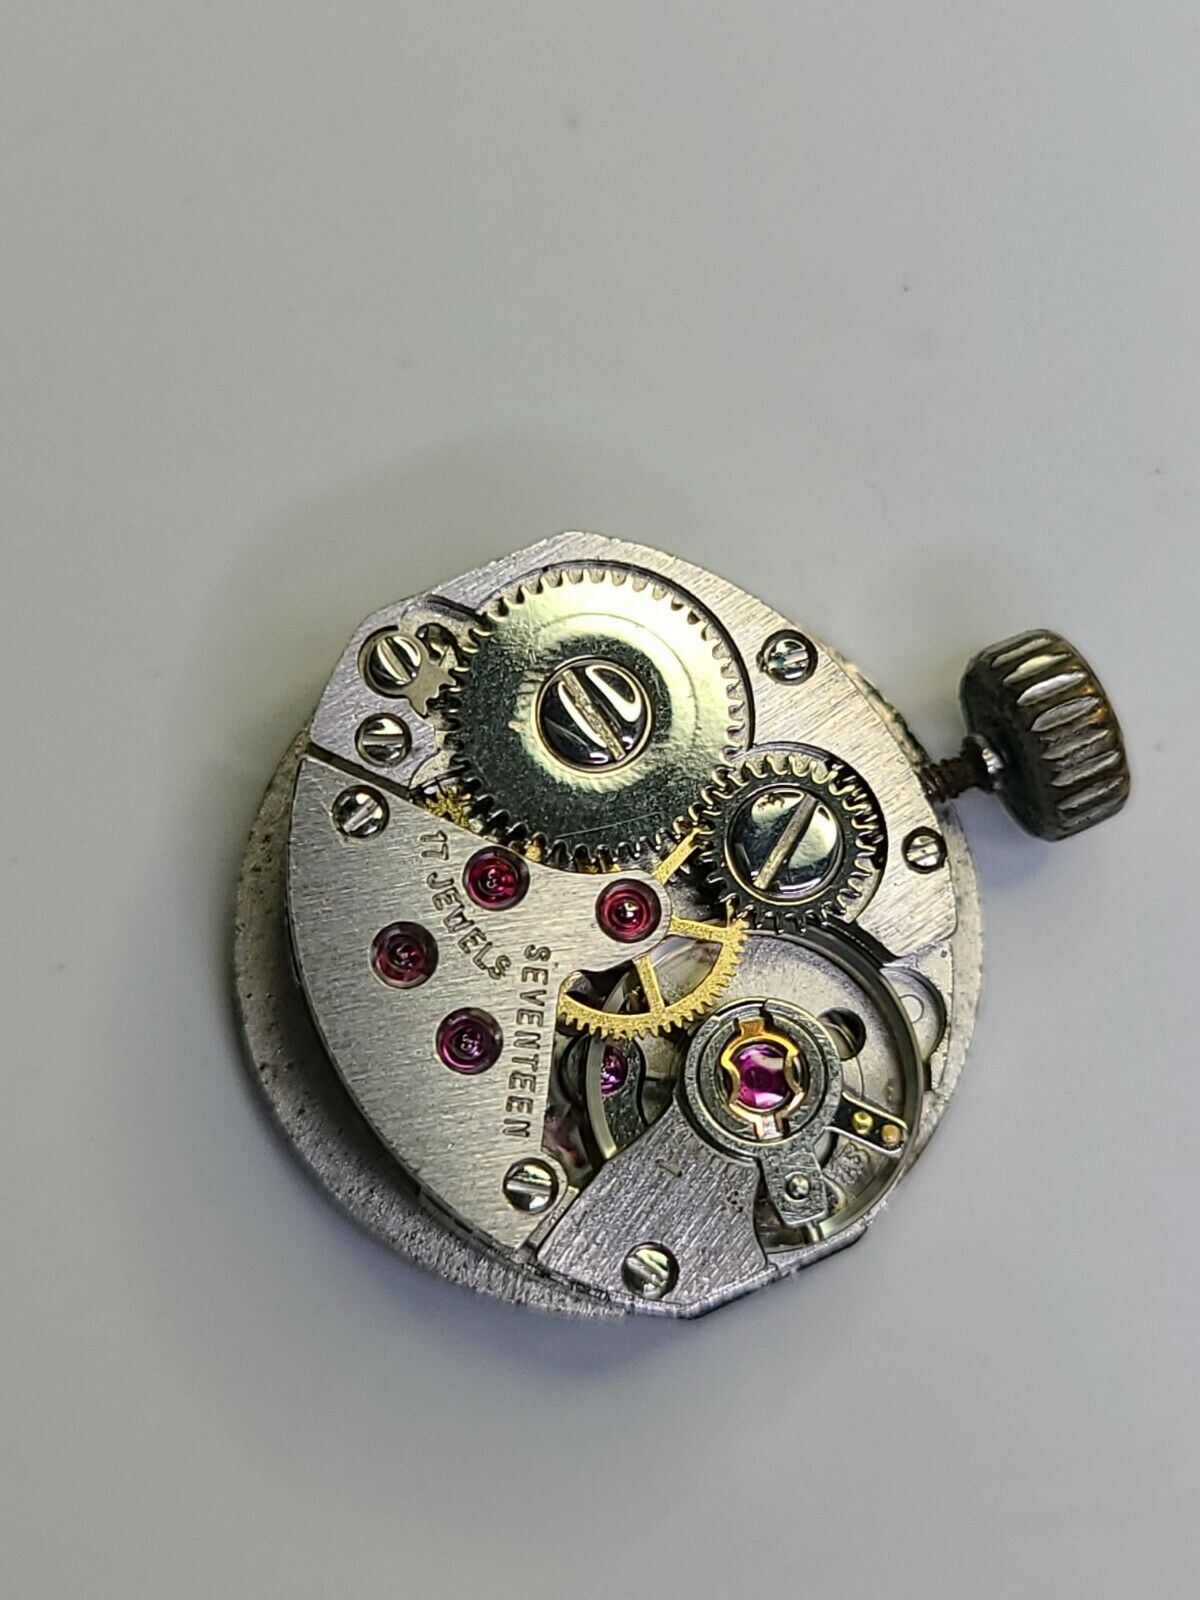 Marty AS Caliber 1977 - 2 INT Watch Movement 17 Jewels with dial and hand